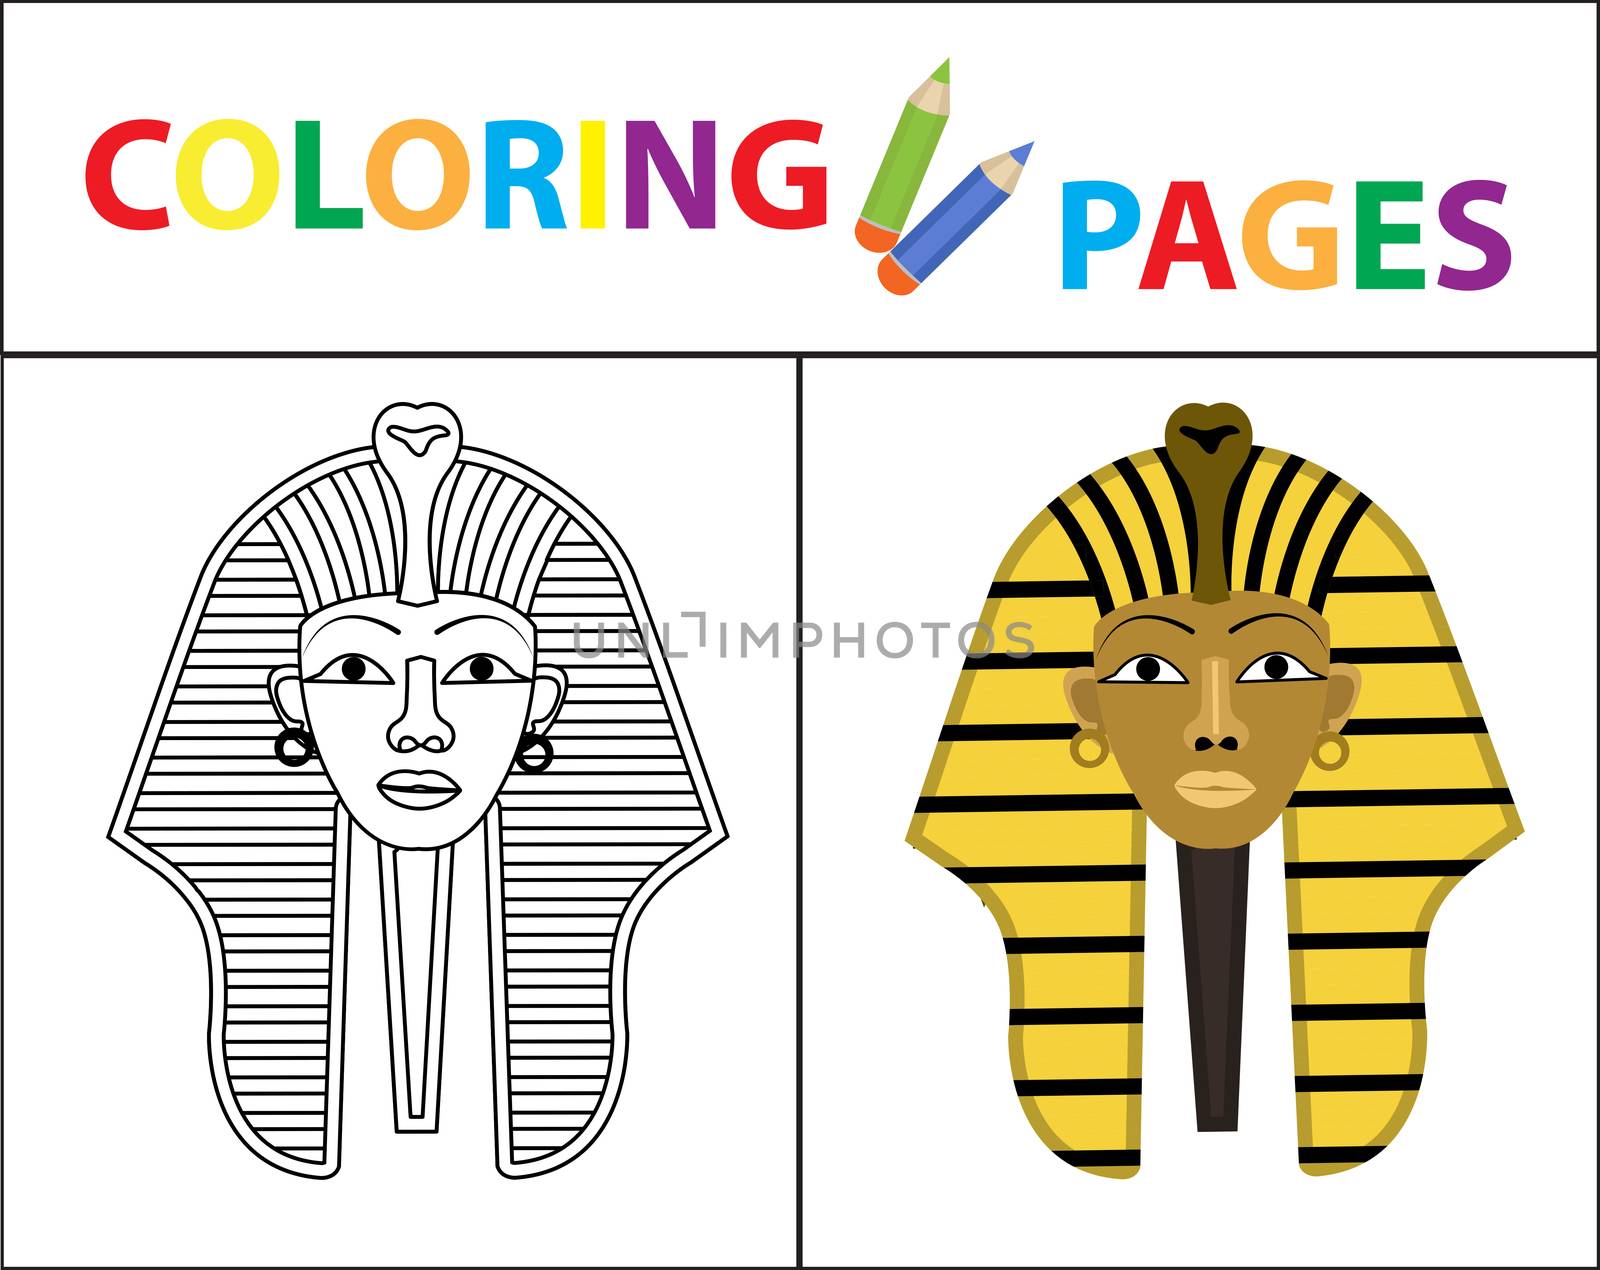 Coloring book page. Pharaoh. Sketch outline and color version. Coloring for kids. Childrens education. illustration